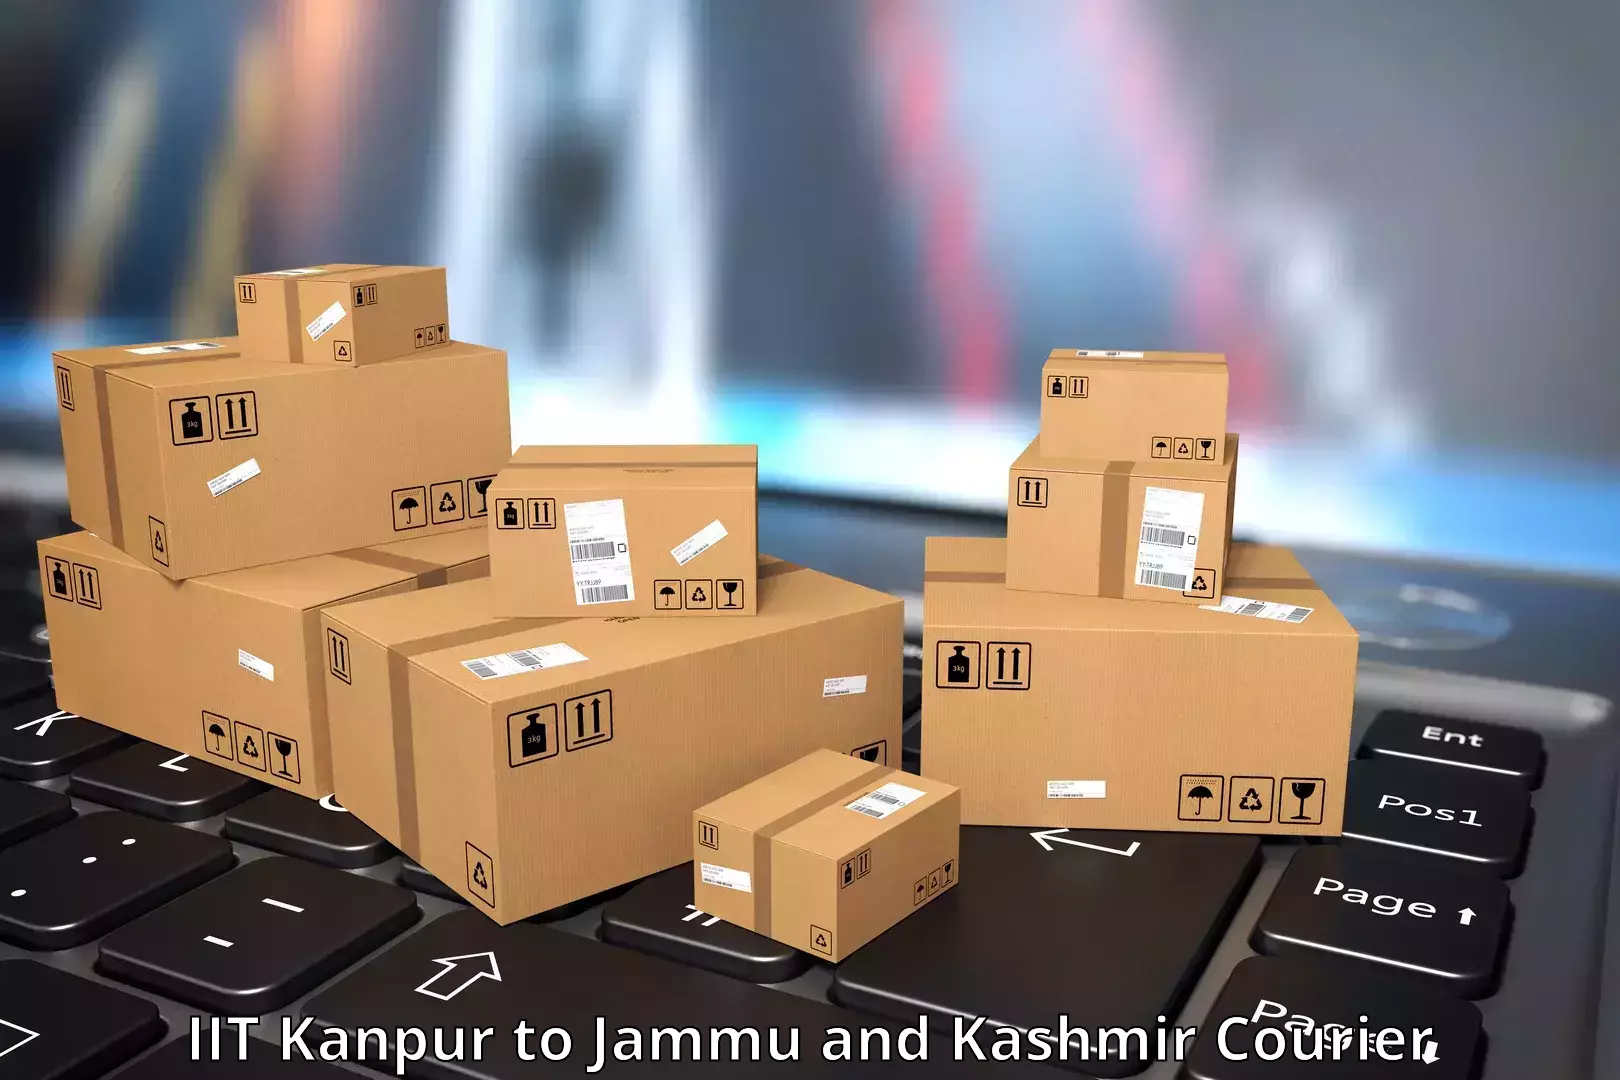 Express delivery network IIT Kanpur to University of Jammu